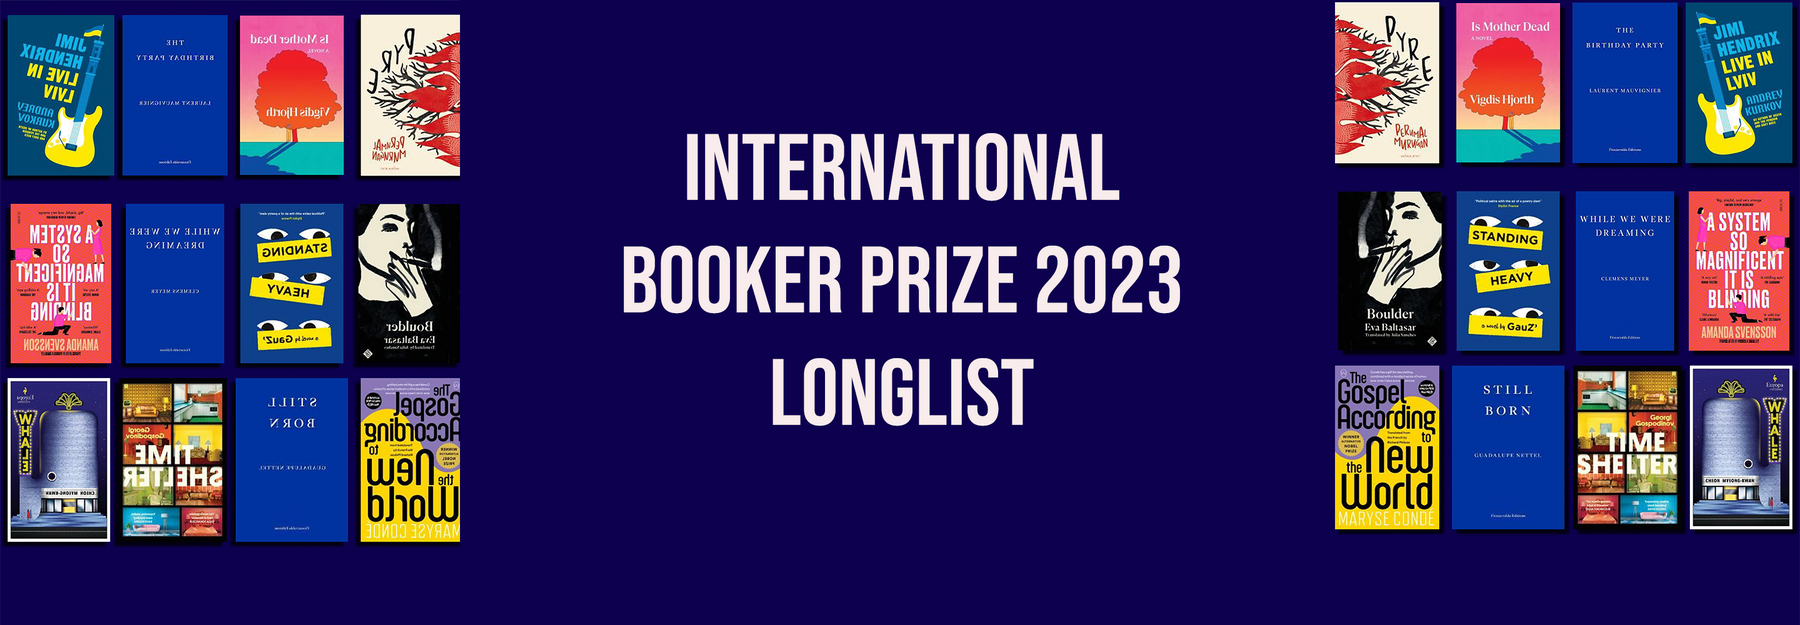 The International Booker Prize 2023